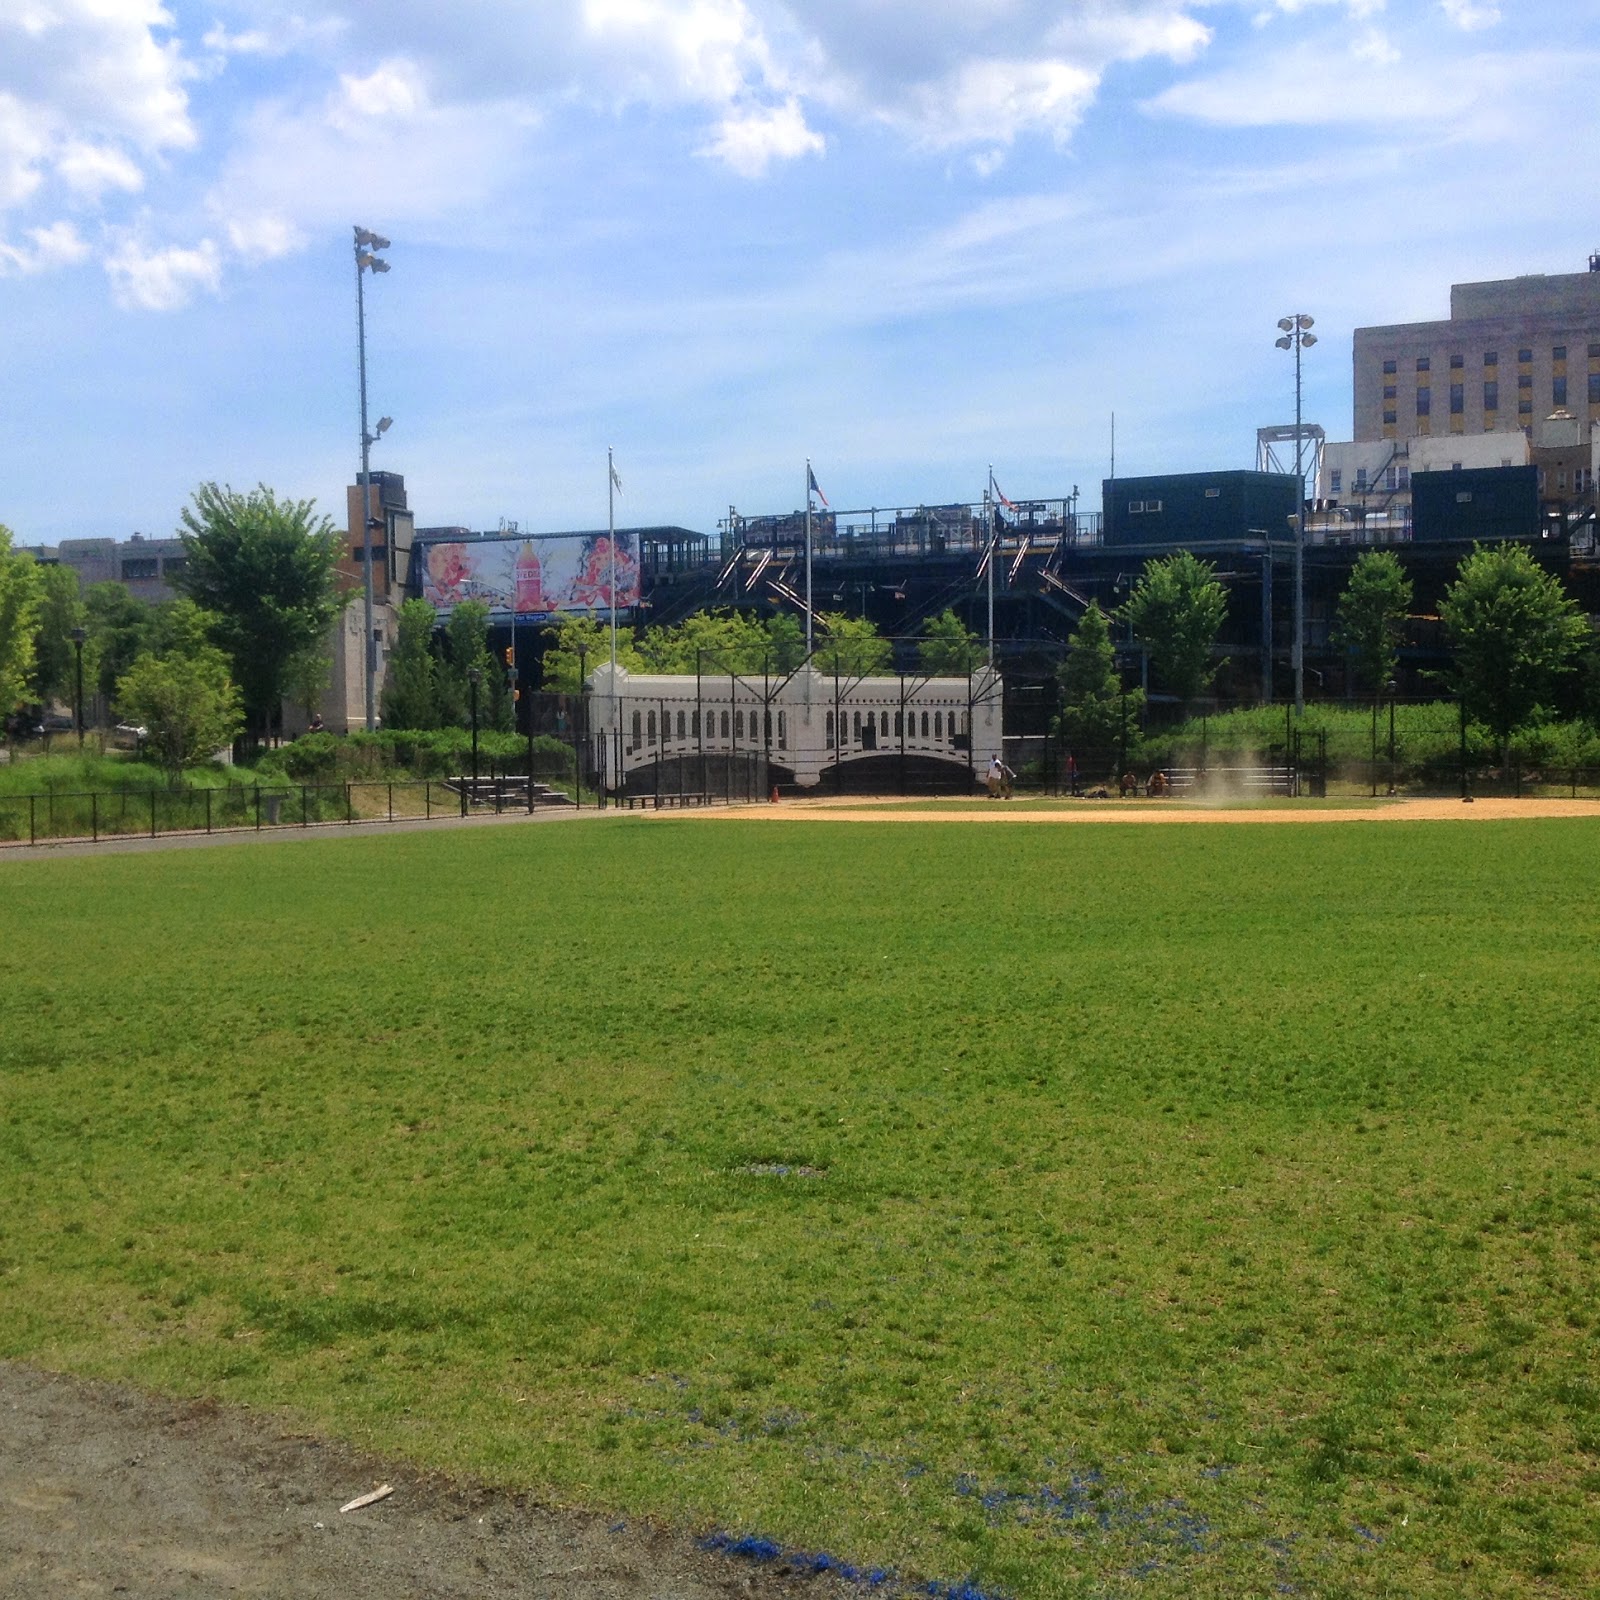 No Such Thing As Was: Heritage Field, Ernie Harwell, and a parking